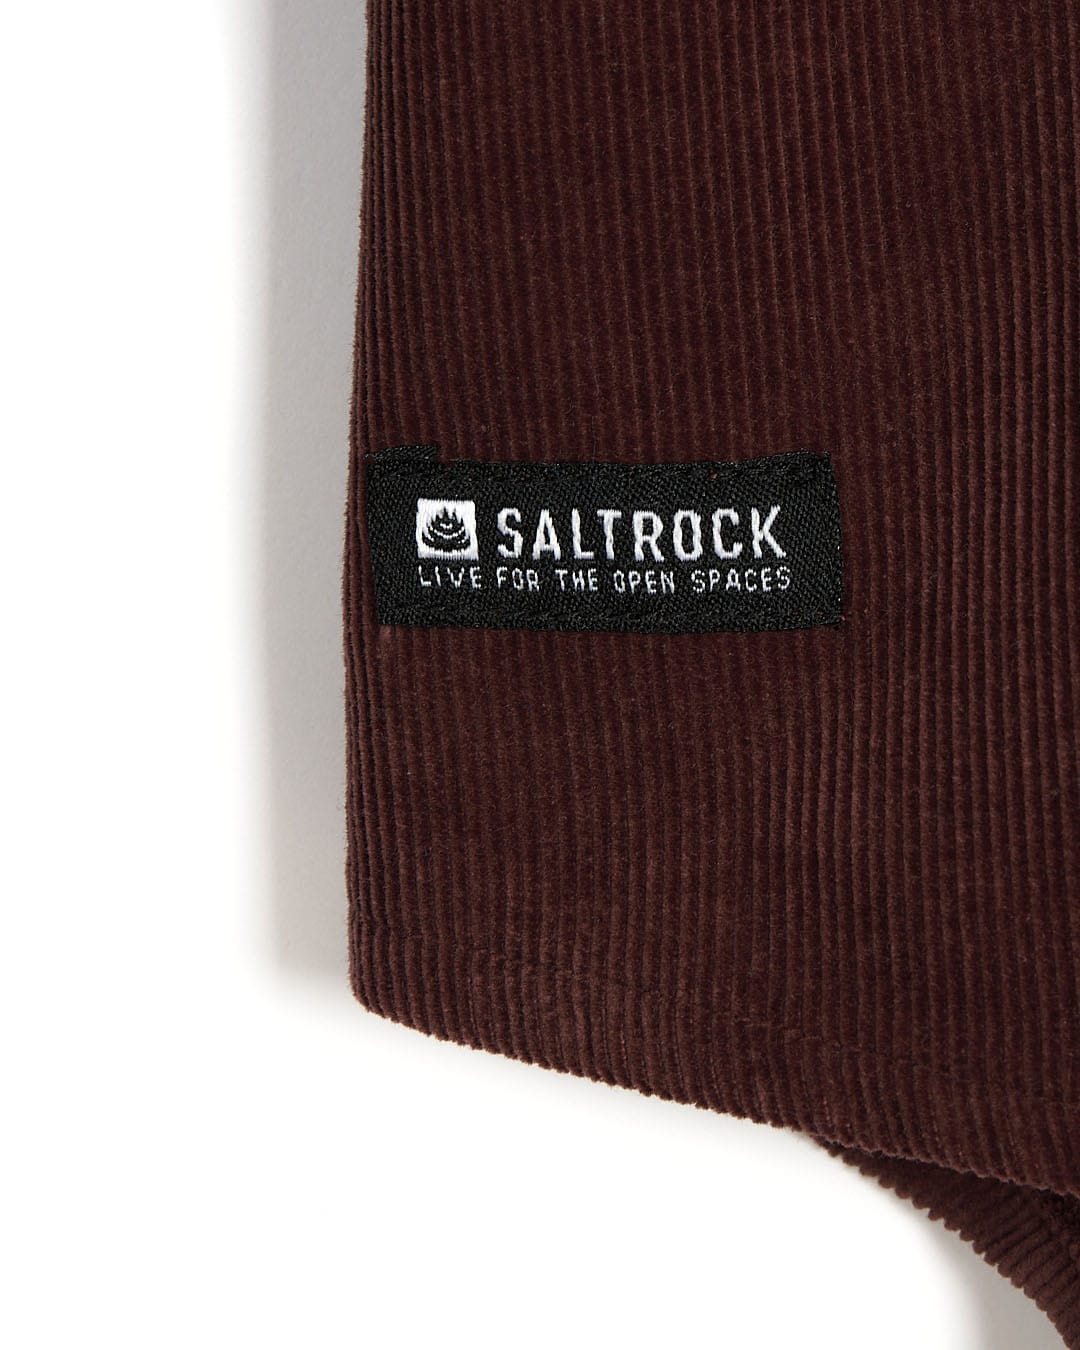 A Linus - Mens Long Sleeve Shirt - Dark Red with the Saltrock logo on it.